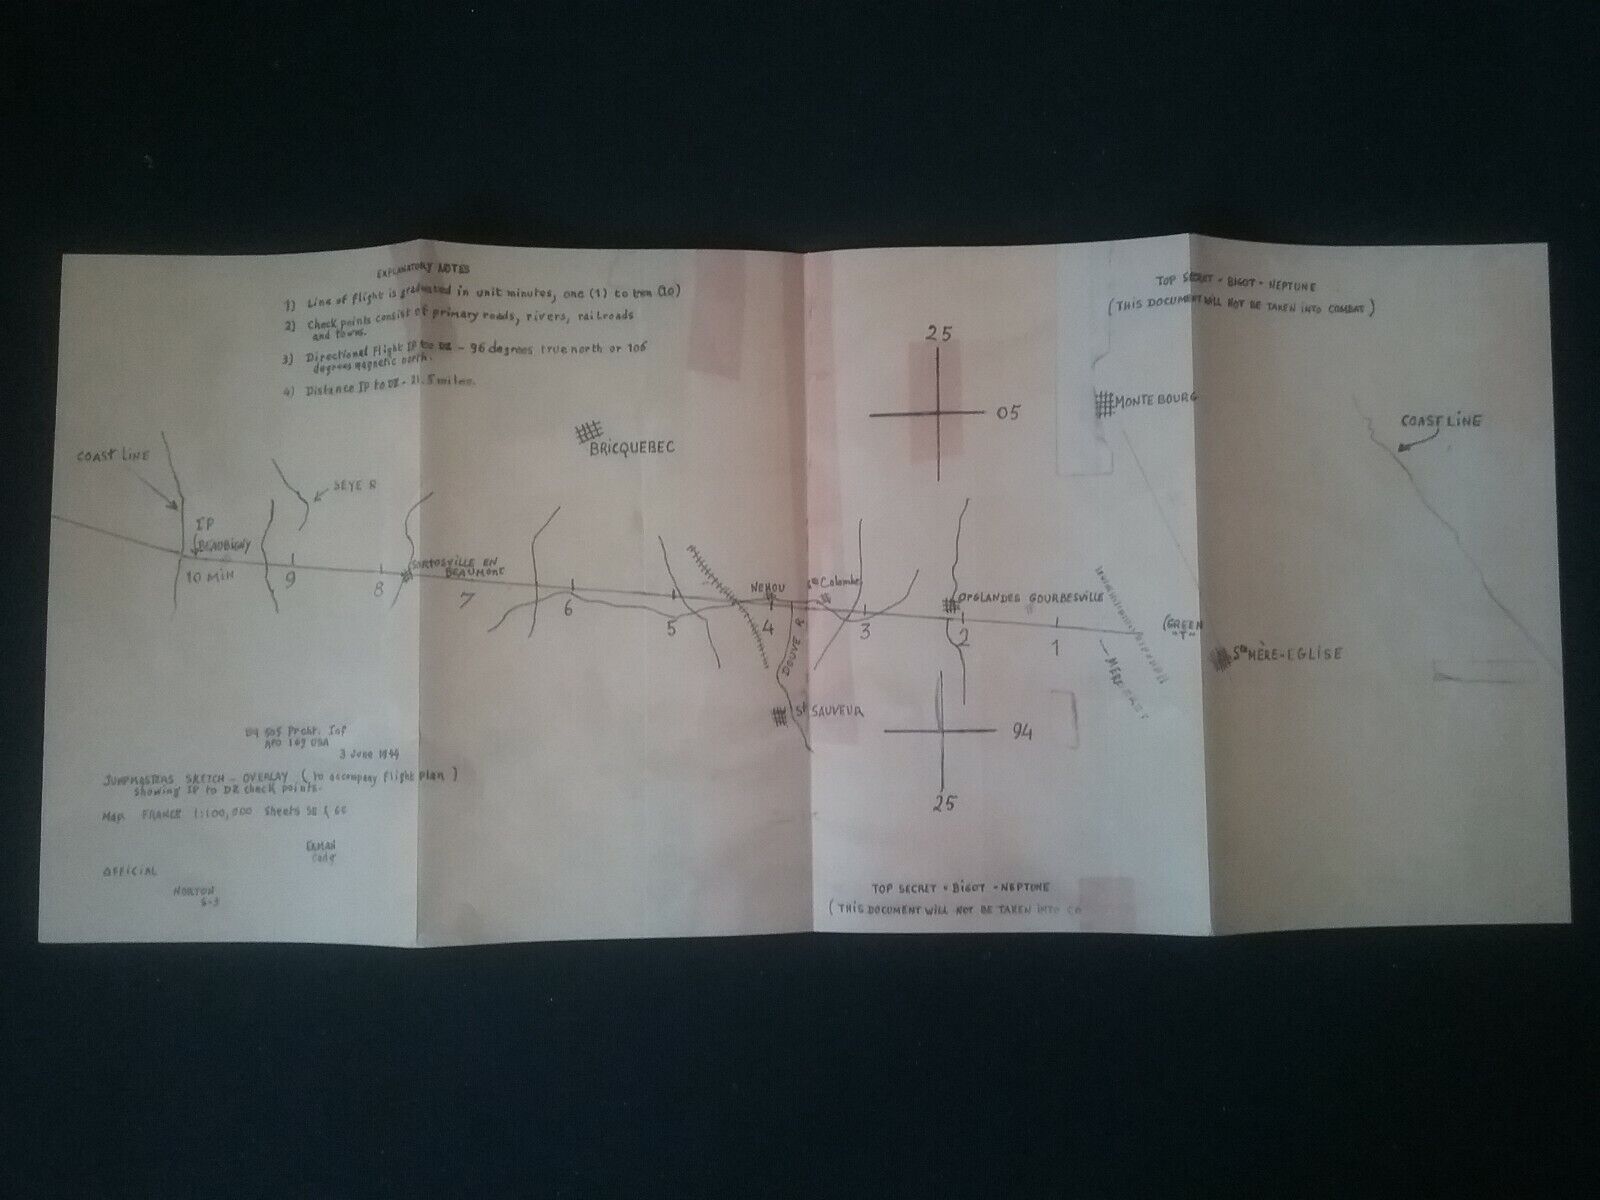 D-DAY TOP SECRET HAND DRAWN MAP *DROP ZONE WEST OF STE-MERE-EGLISE 82ND AIRBORNE